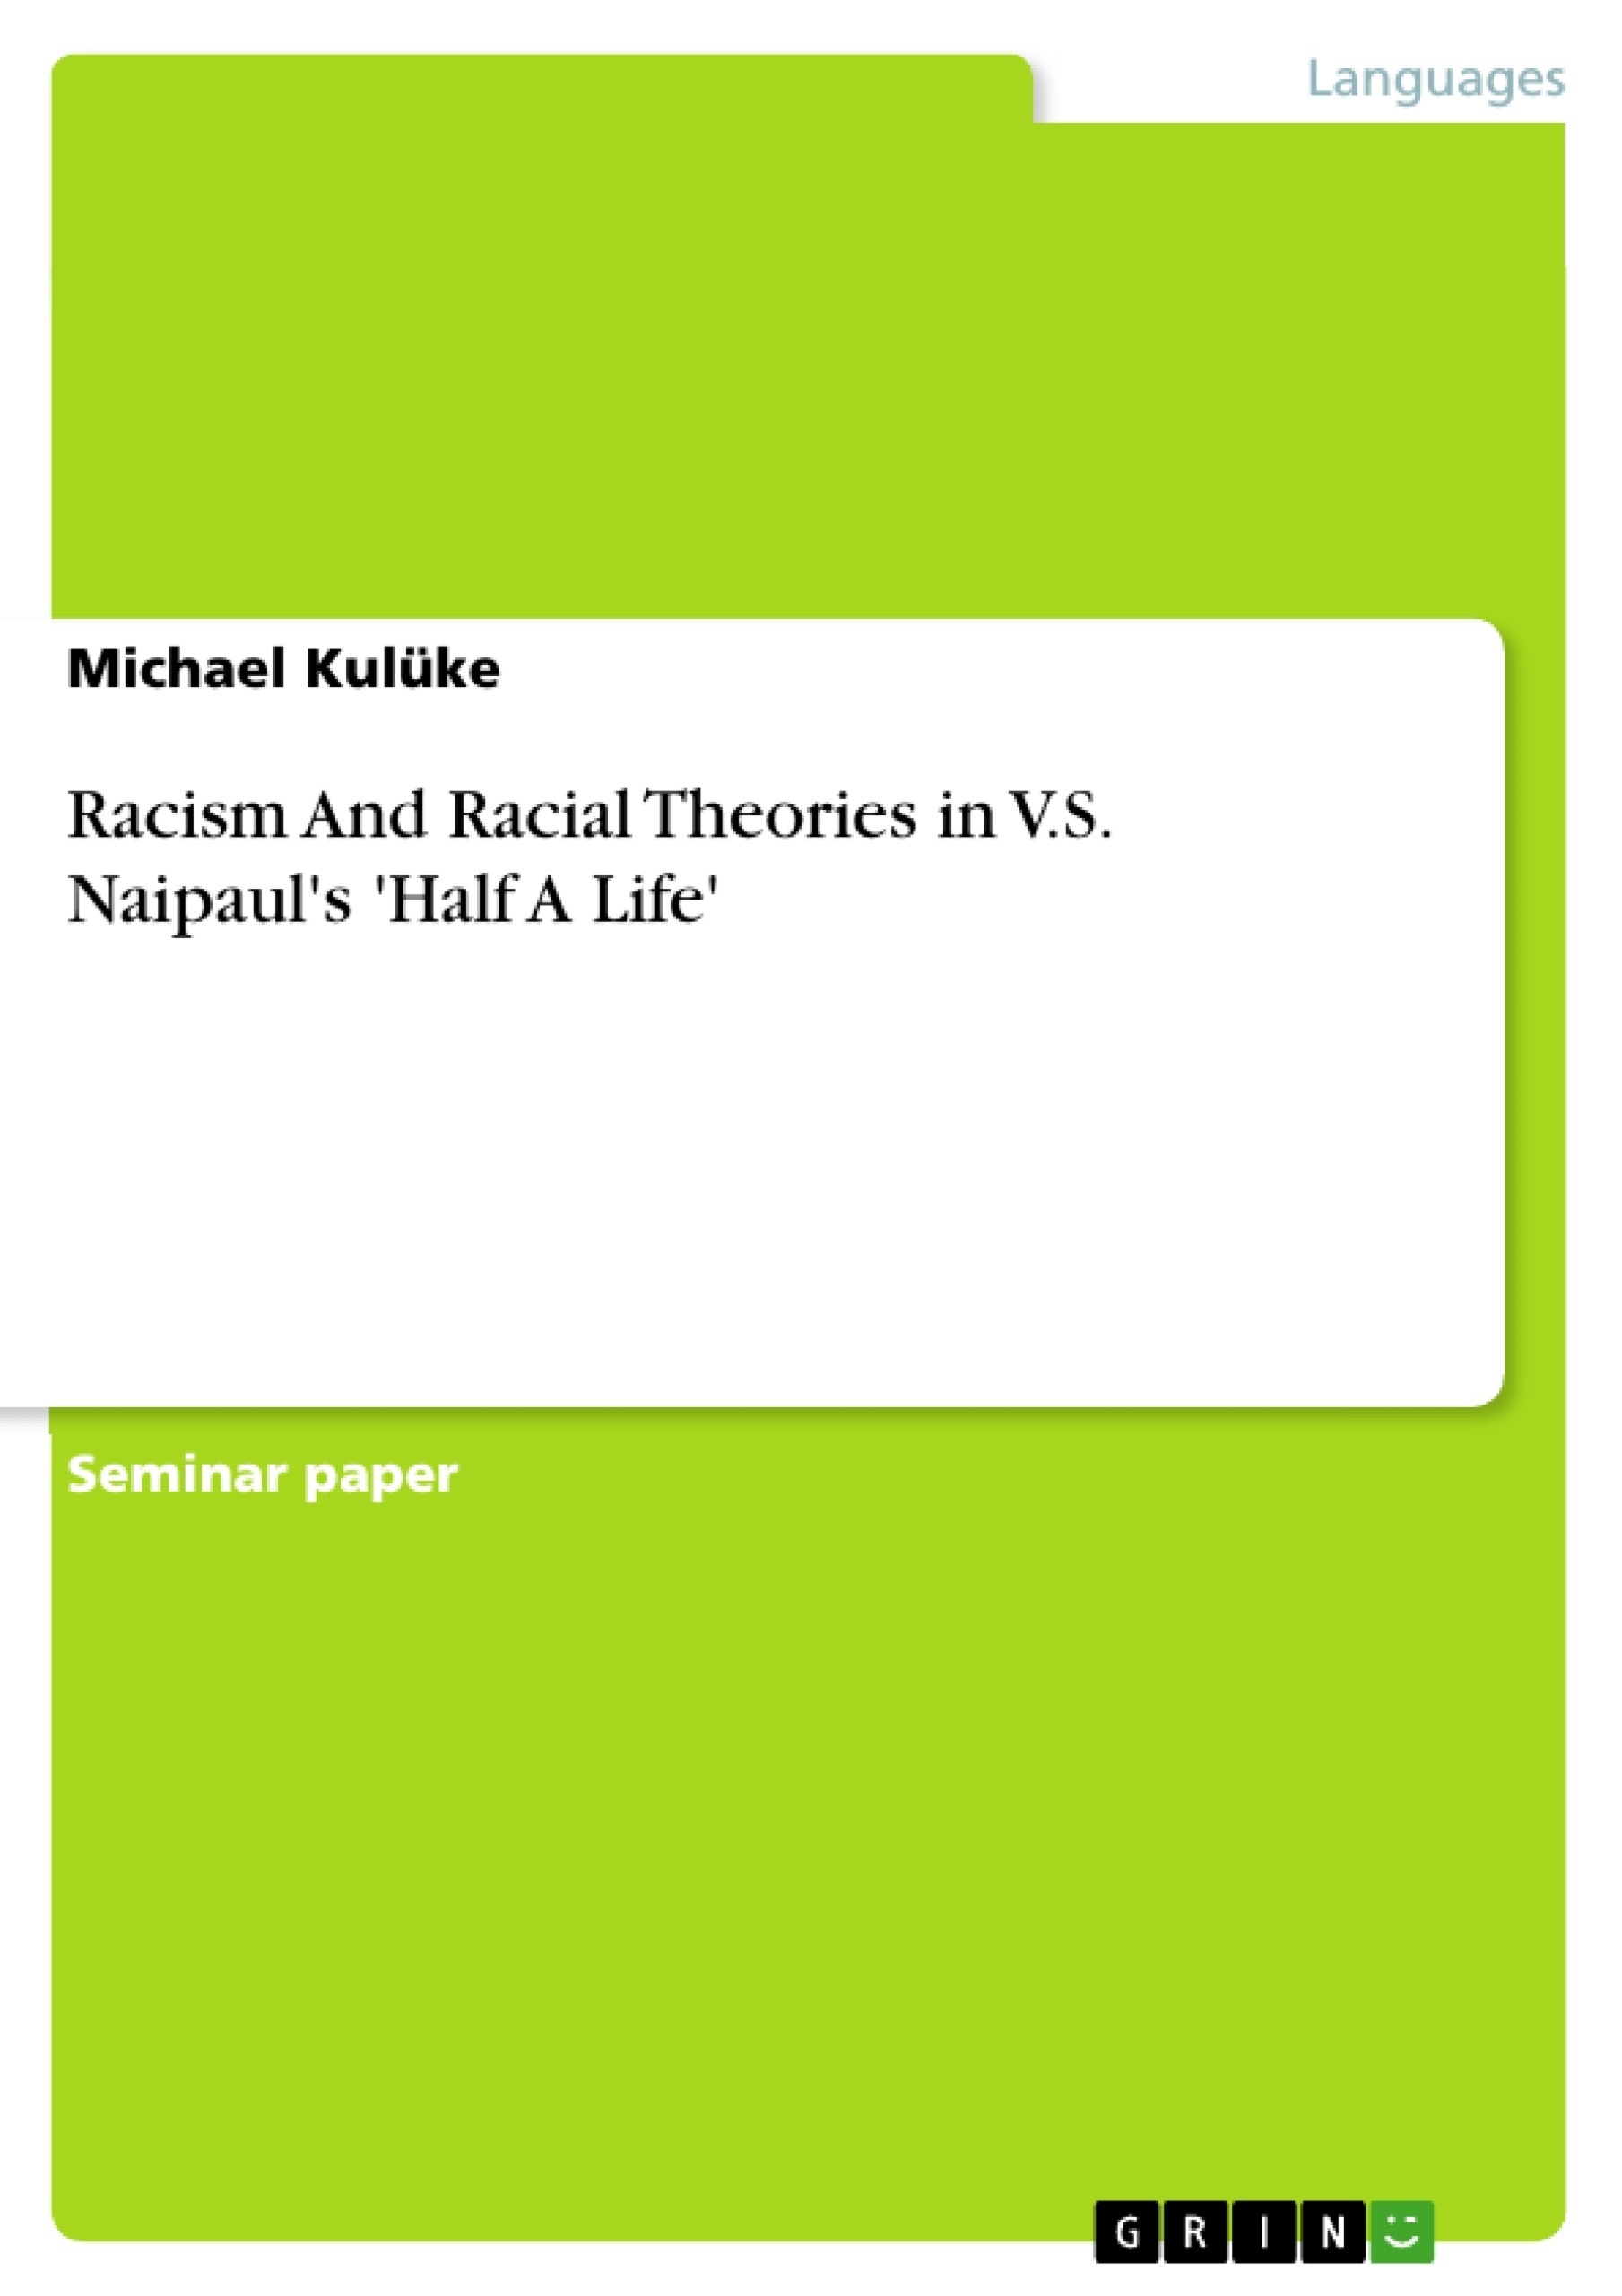 Título: Racism And Racial Theories in V.S. Naipaul's 'Half A Life'